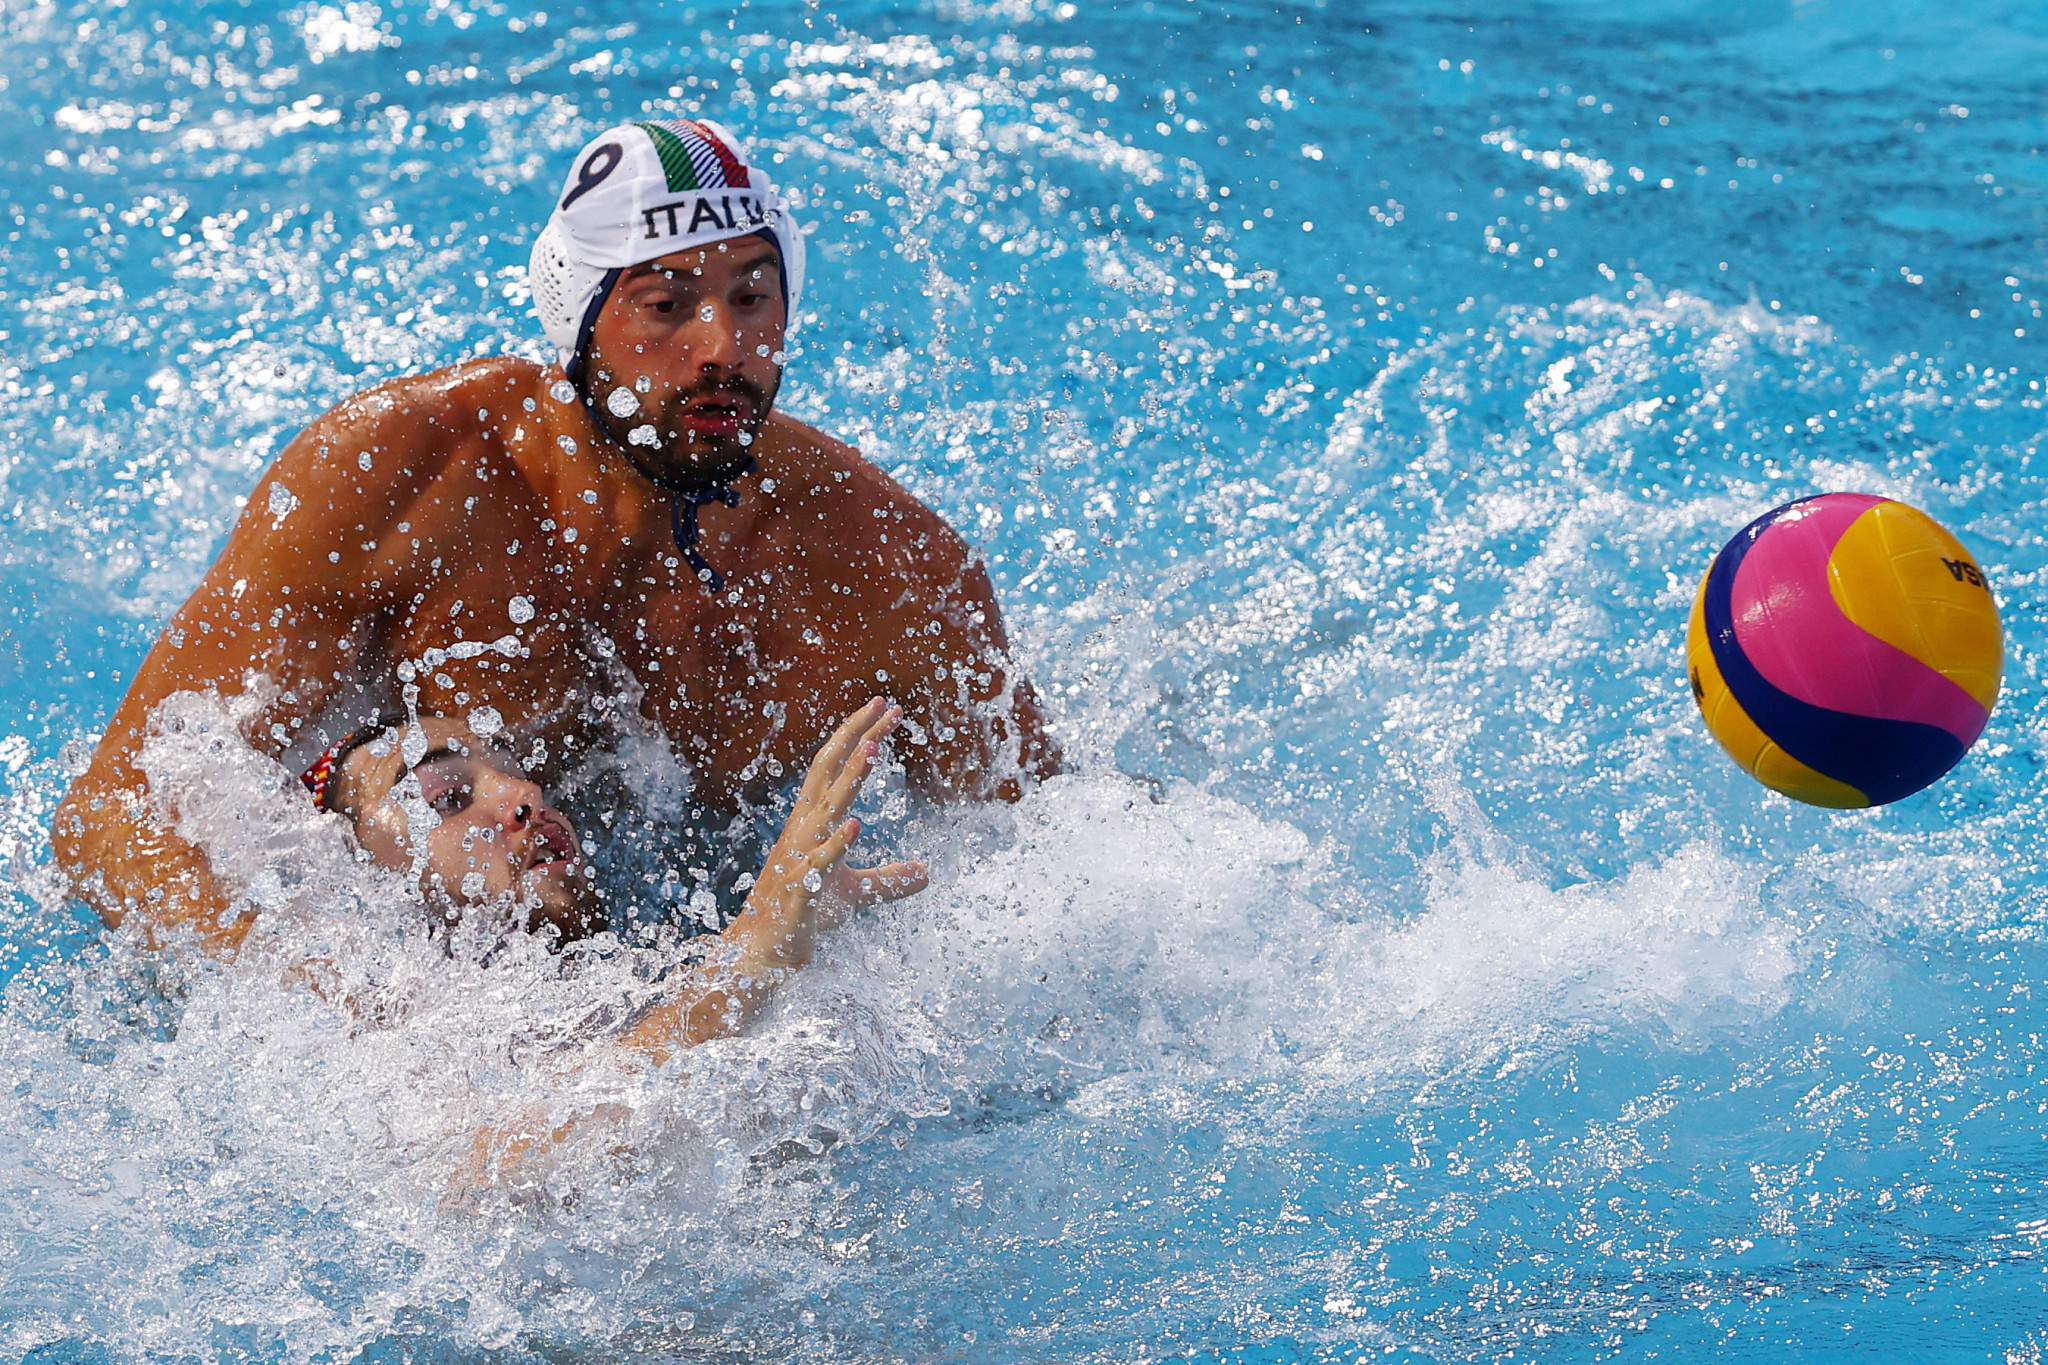 Italy beat Spain to set up FINA Men's Water Polo World League final versus US